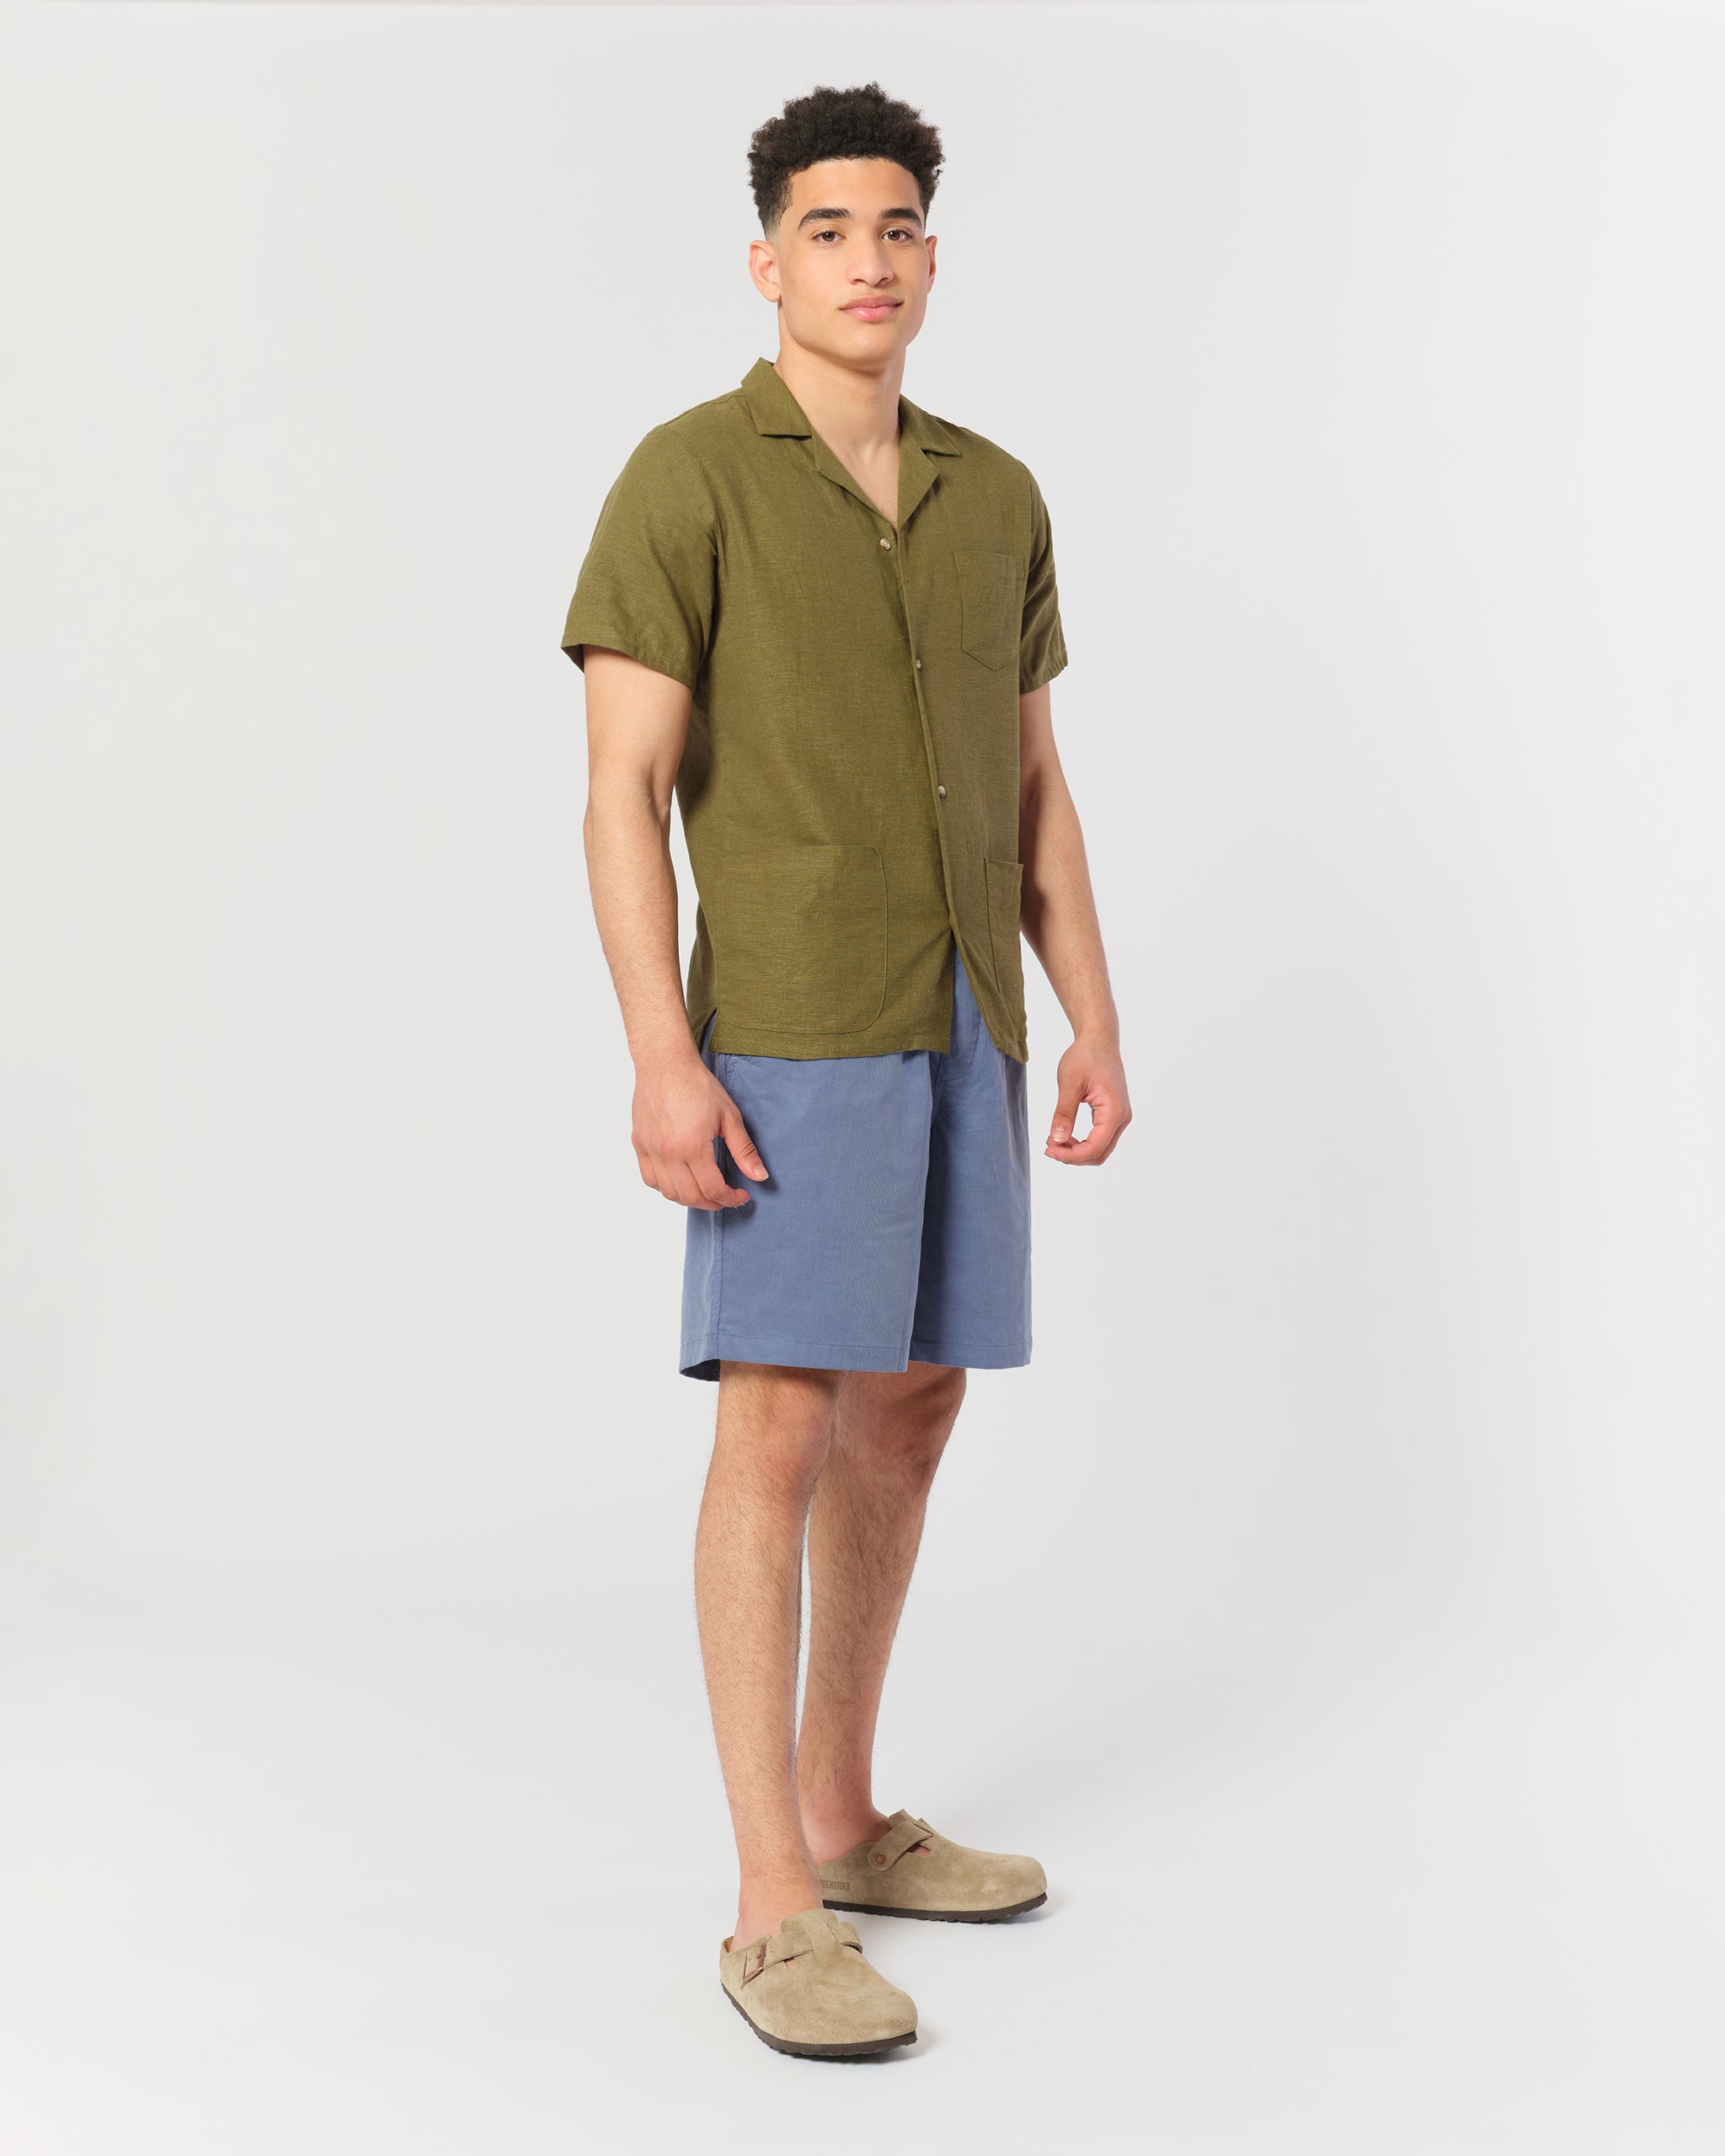 An olive green linen camp shirt with a chest pocket and two lower pockets on the front shot on model